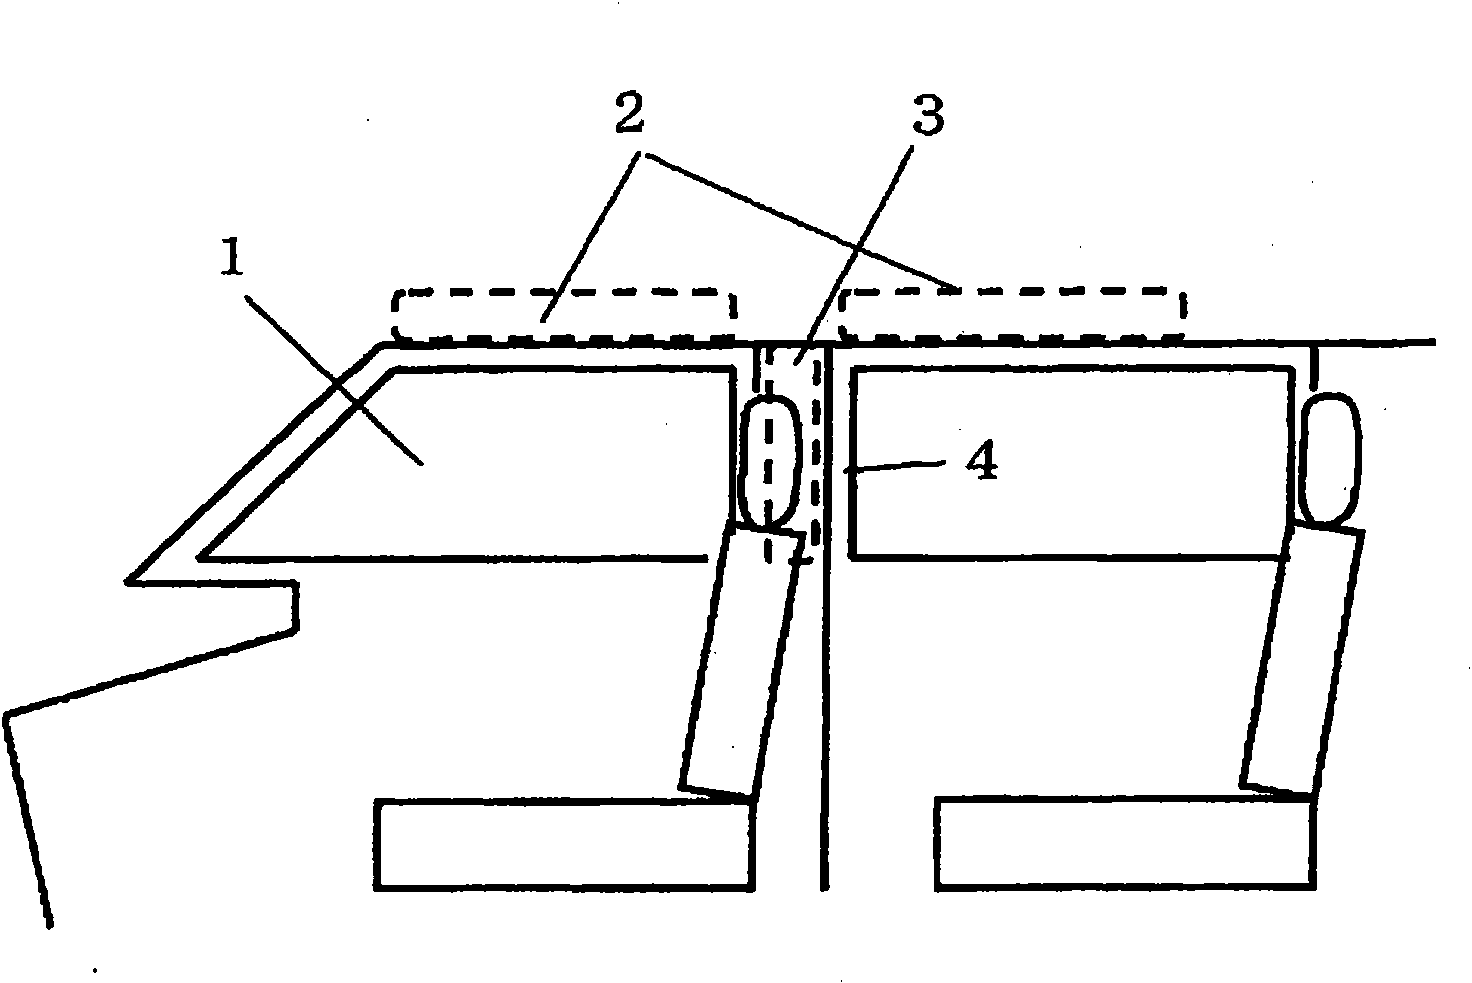 Heating system for vehicle